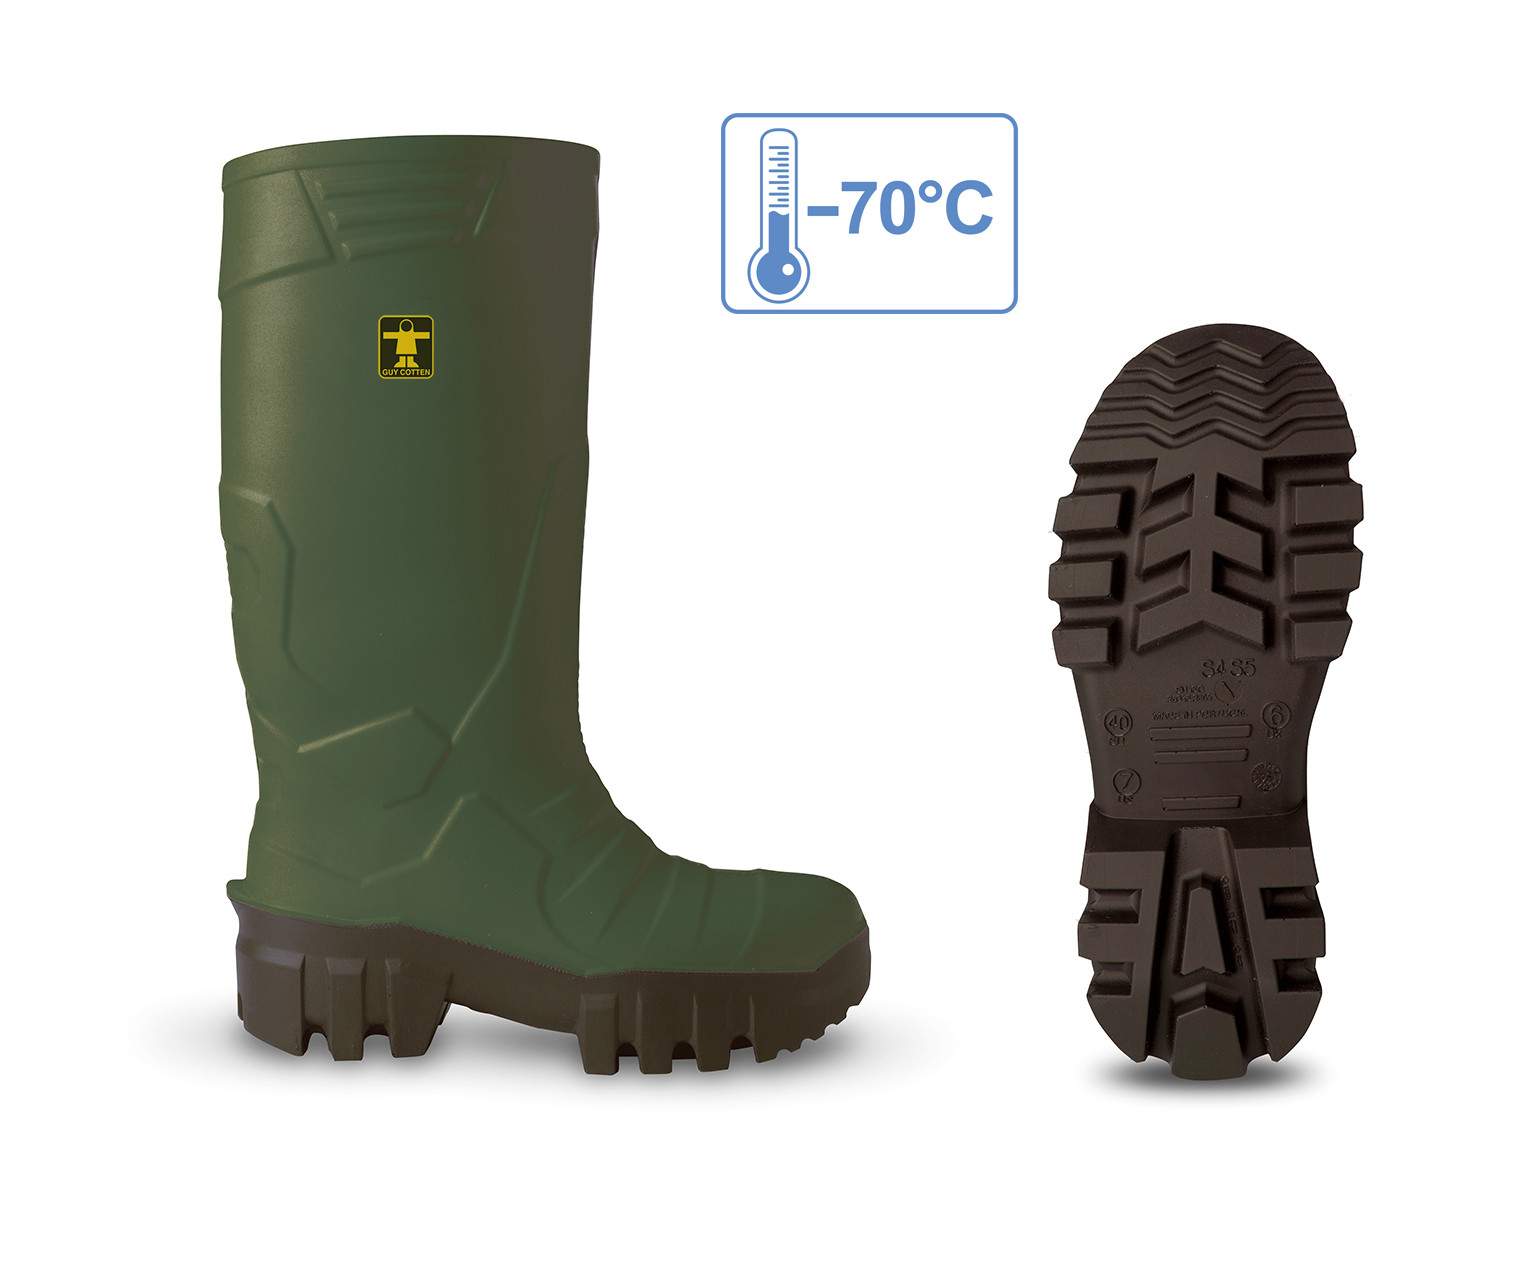 Safety Wellingtons Safety Toe Cap Fishermans Wellies Wellingtons GUY COTTEN 